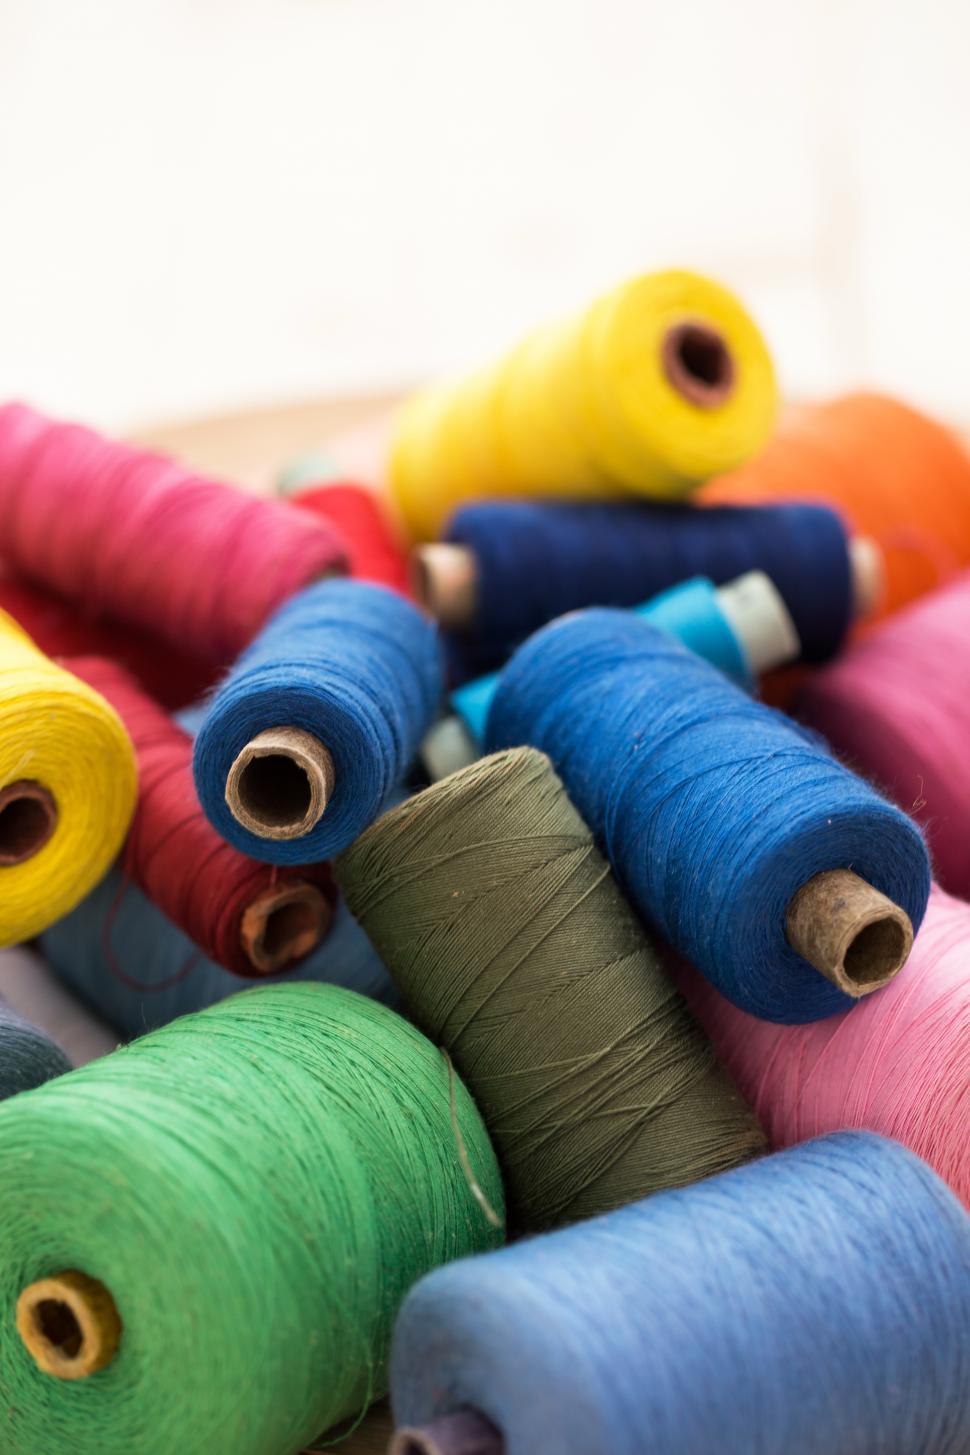 Download Free Stock Photo of Colorful threads on the table 